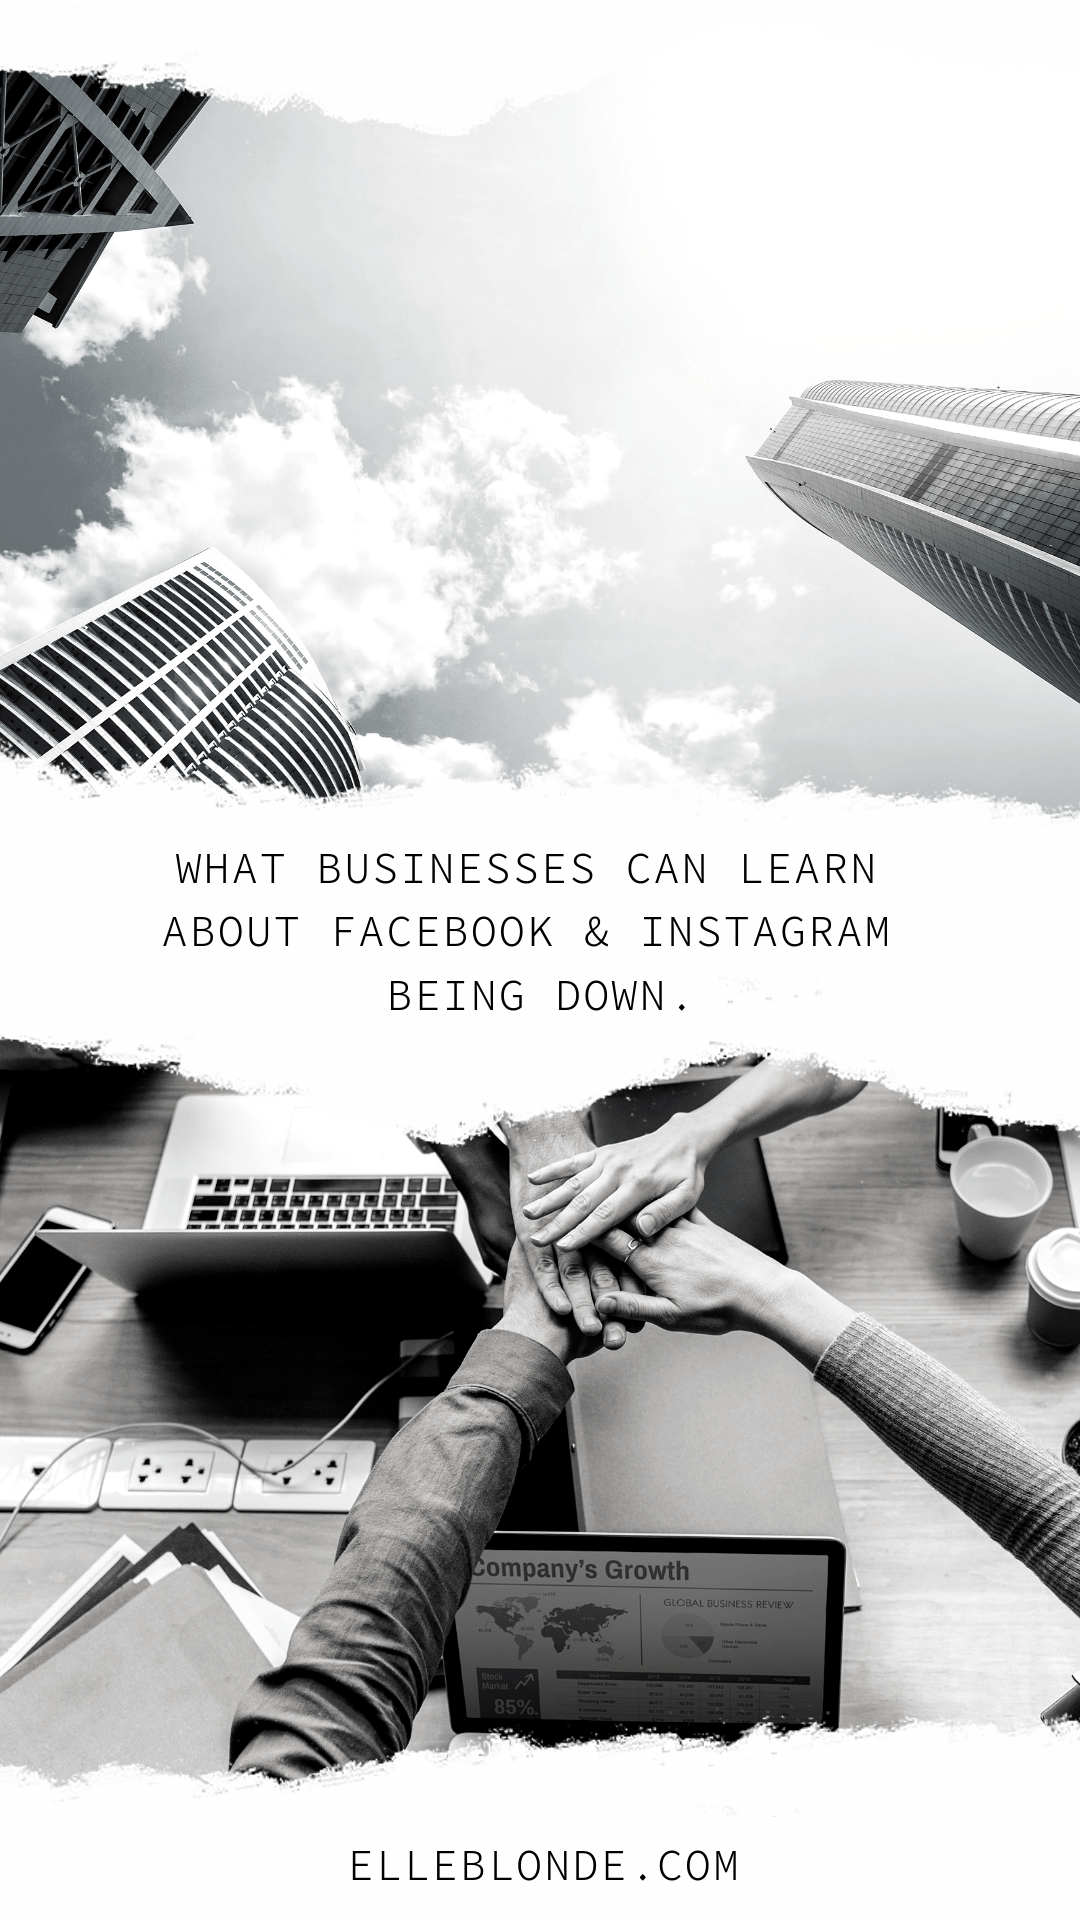 5 Business Lessons We Can Learn From Facebook and Instagram Going Down 1